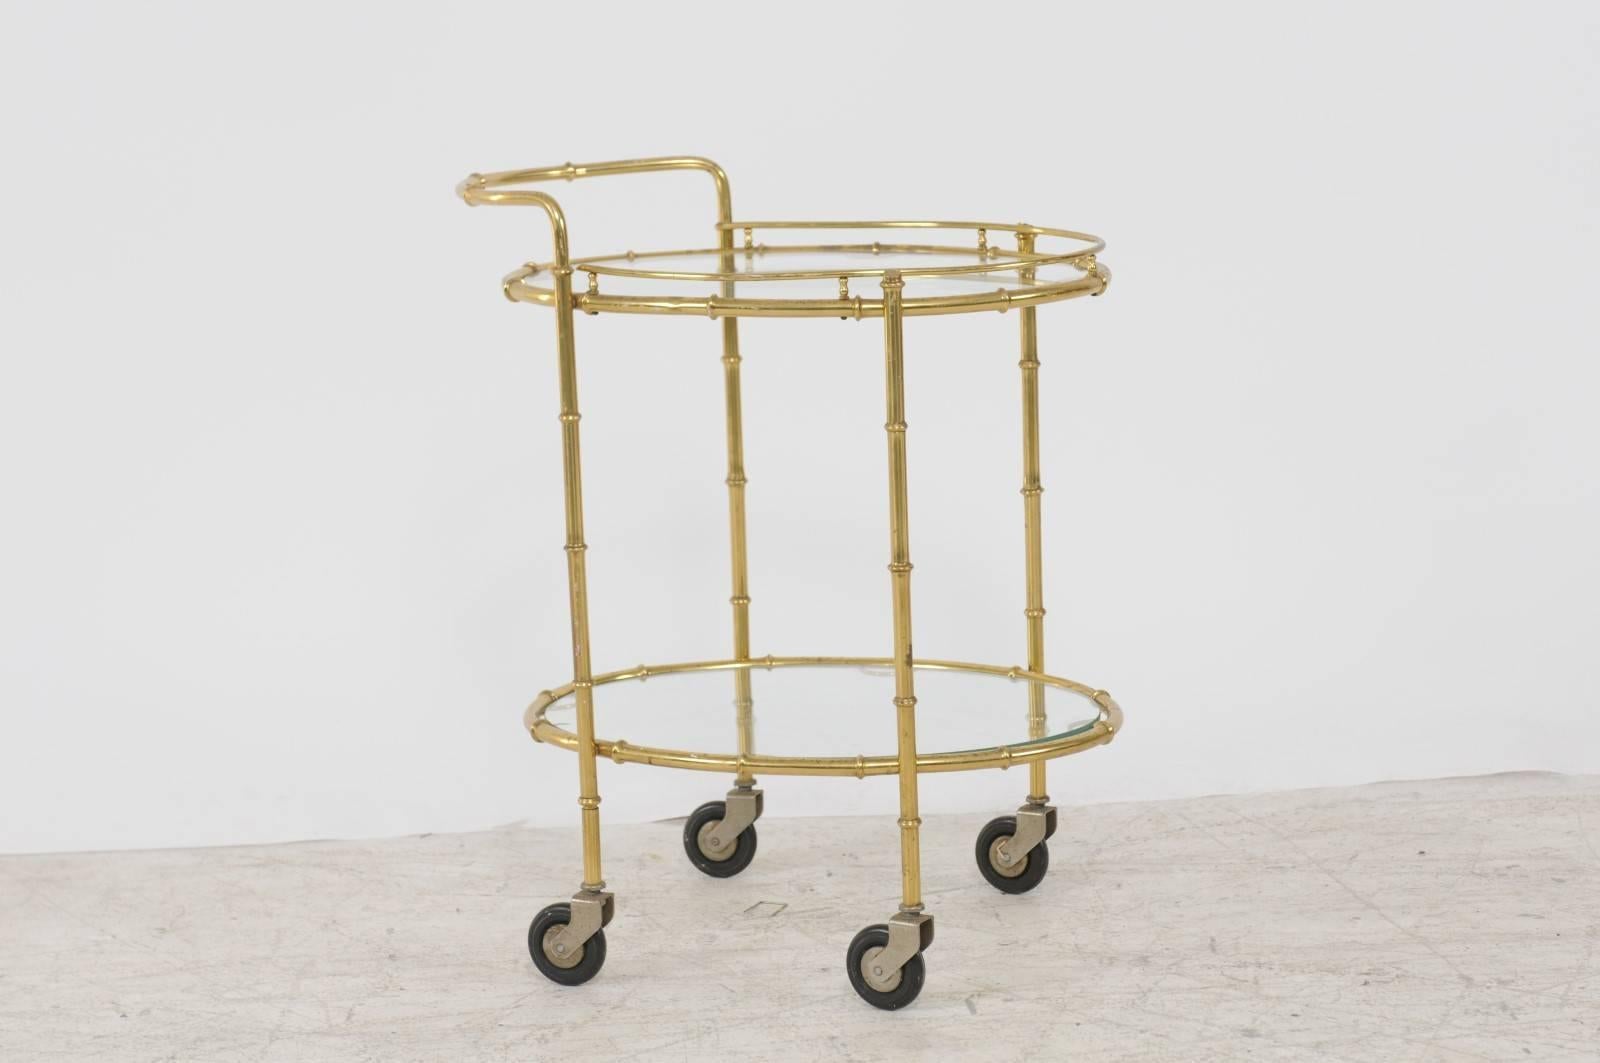 A French vintage brass cart from the 1950s with glass oval shelves and casters. Born during the mid-20th century, this exquisite brass cart features two levels of oval glass shelves. The upper section of the piece showcases a curvilinear handle